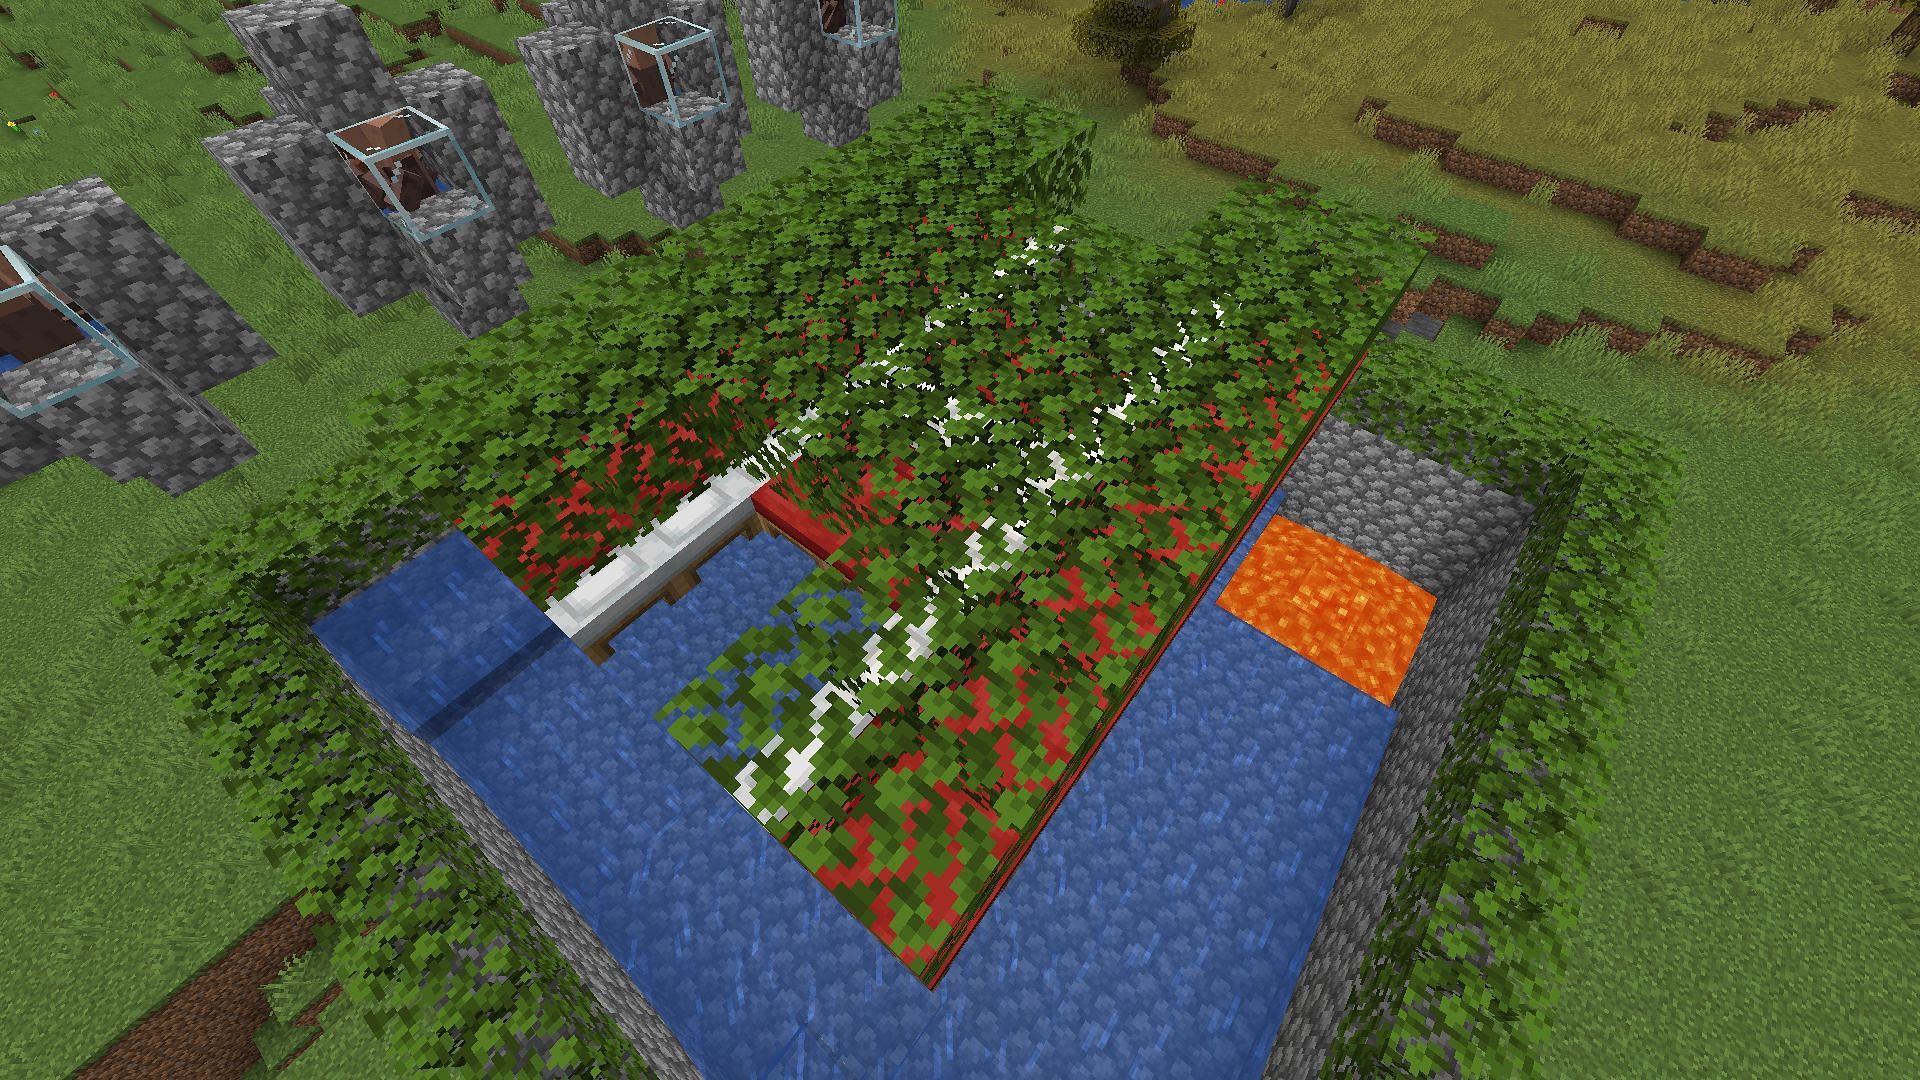 The beds covered in leaves (Image via Minecraft)